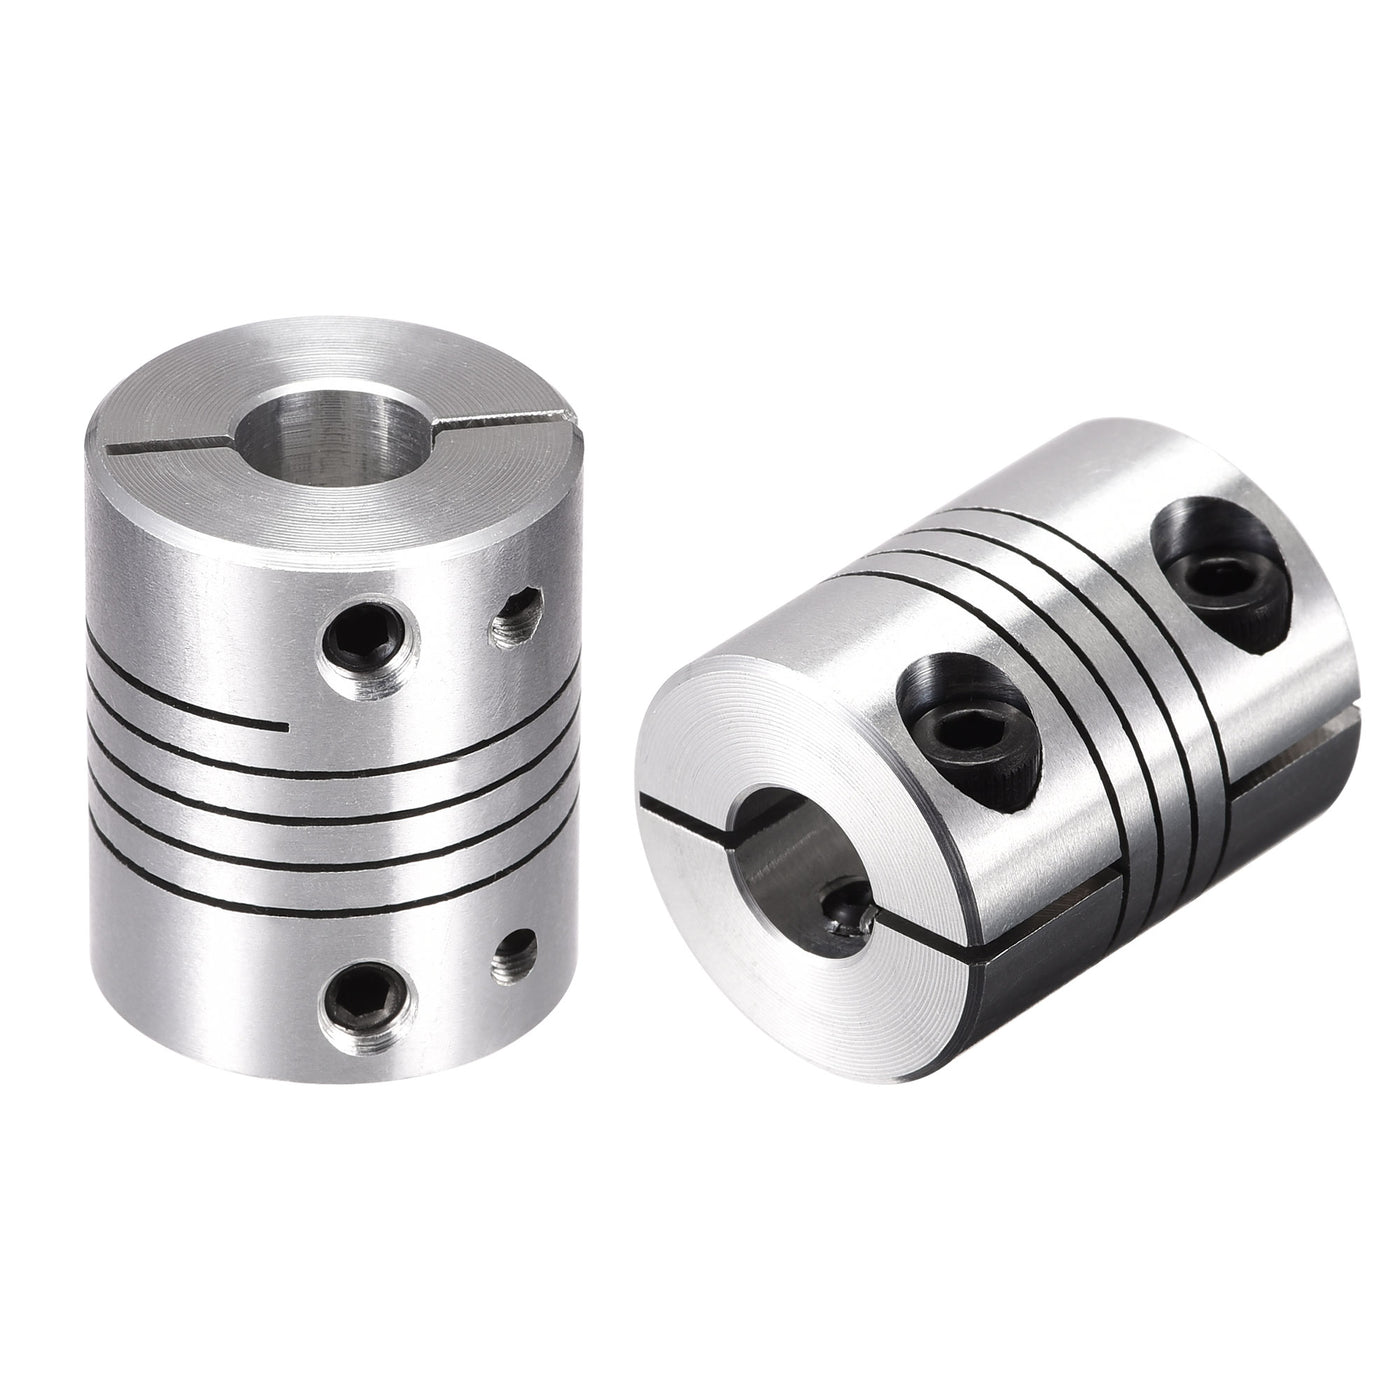 uxcell Uxcell 2PCS Motor Shaft 8mm to 8mm Helical Beam Coupler Coupling 20mm Dia 25mm Length